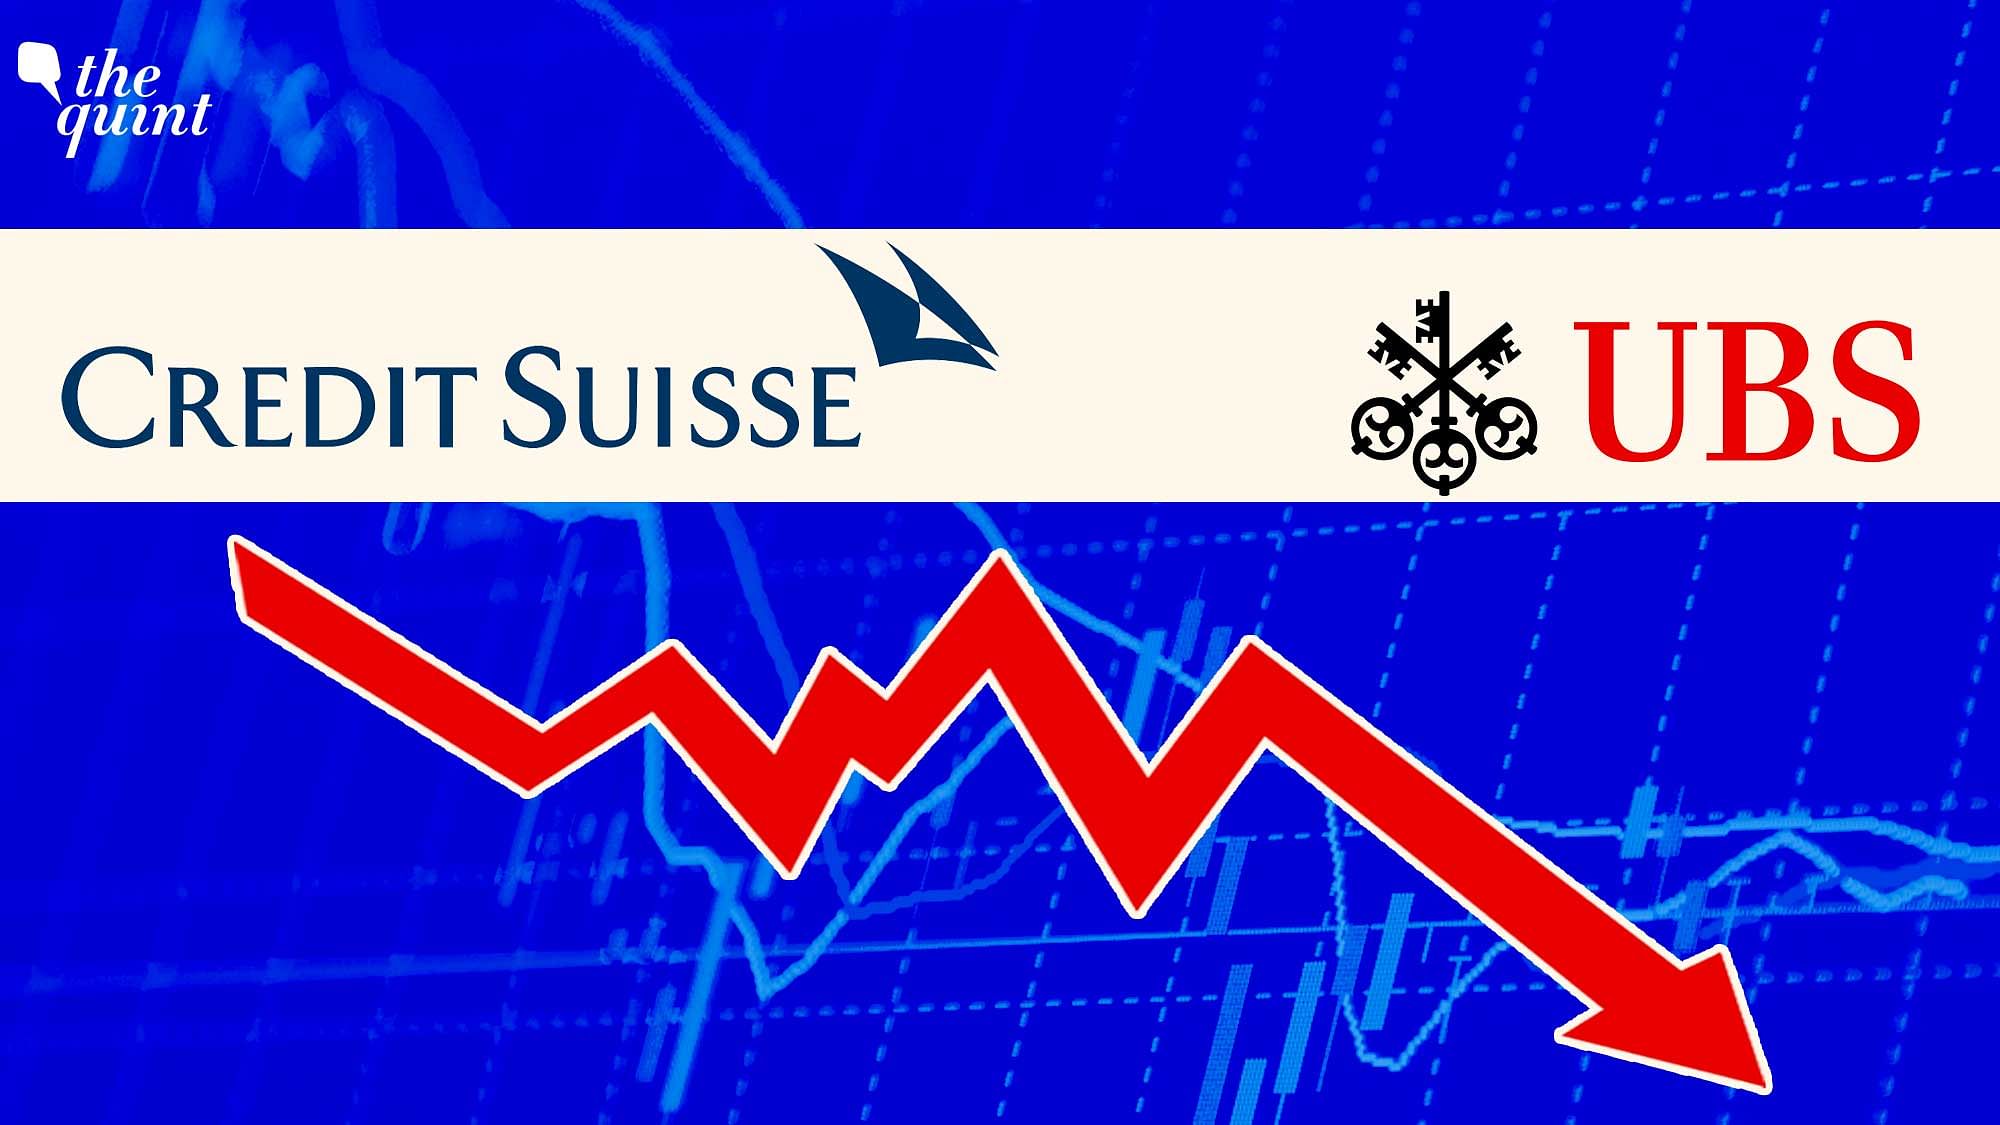 <div class="paragraphs"><p>UBS took over its rival Credit Suisse after the latter's share prices nosedived over the last week, eventually leading to its collapse on Sunday, 19 March.&nbsp;</p></div>